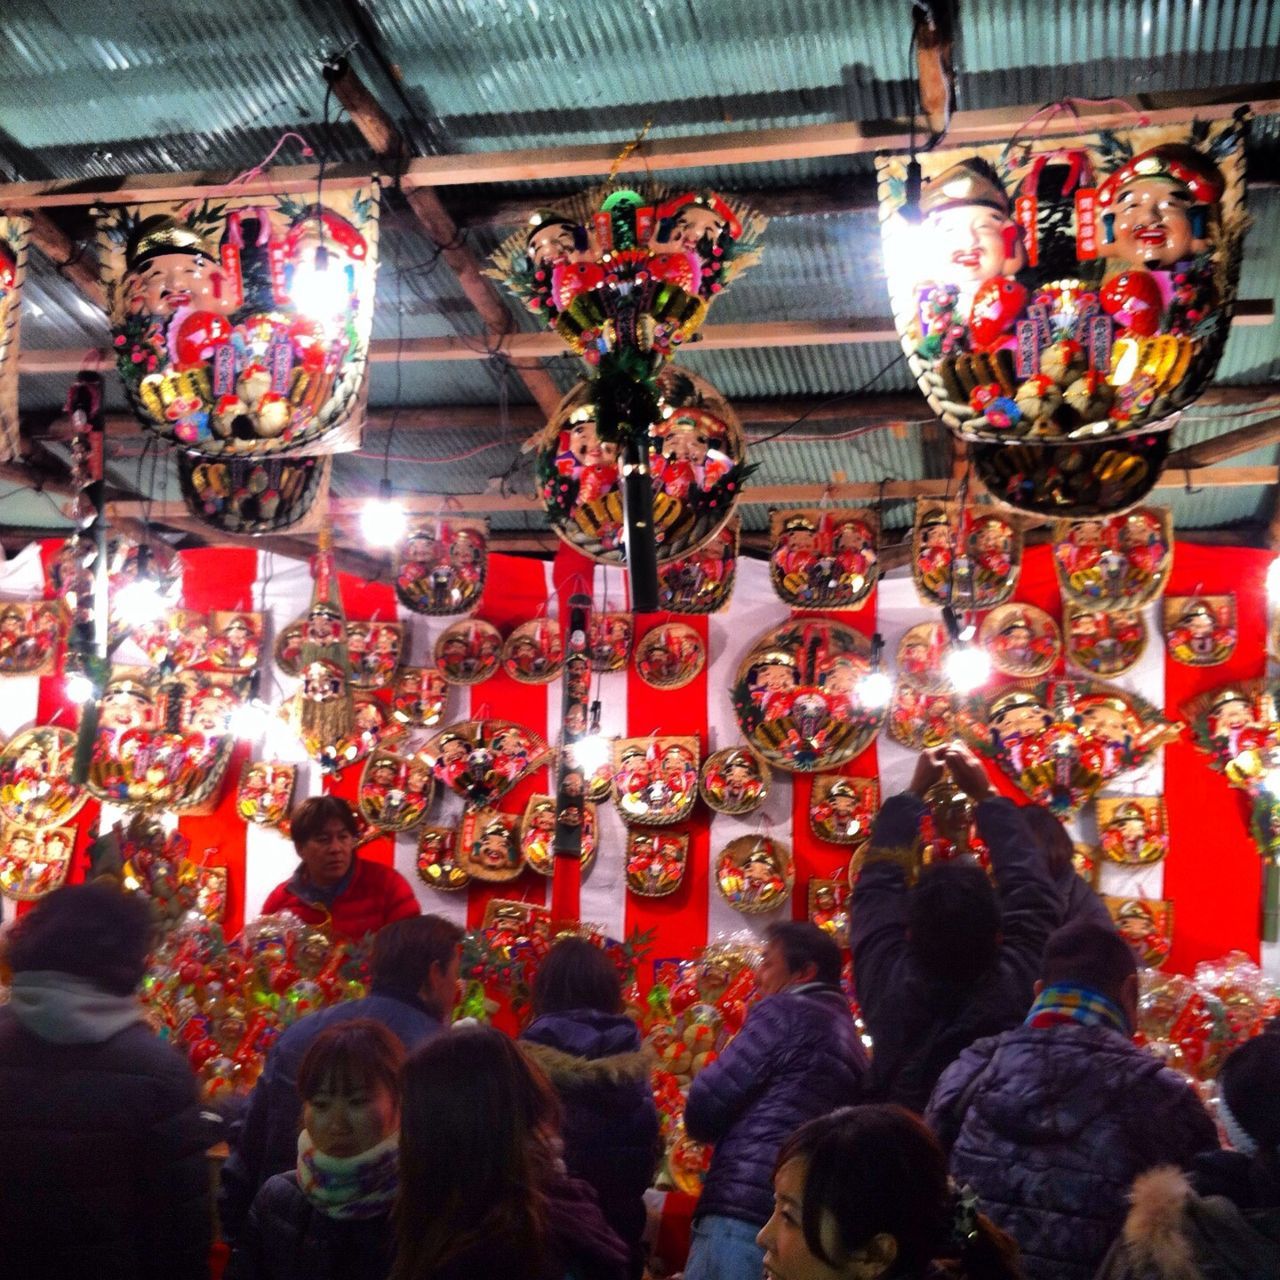 illuminated, large group of people, celebration, person, indoors, men, lifestyles, tradition, cultures, decoration, lighting equipment, leisure activity, hanging, night, lantern, traditional festival, crowd, retail, religion